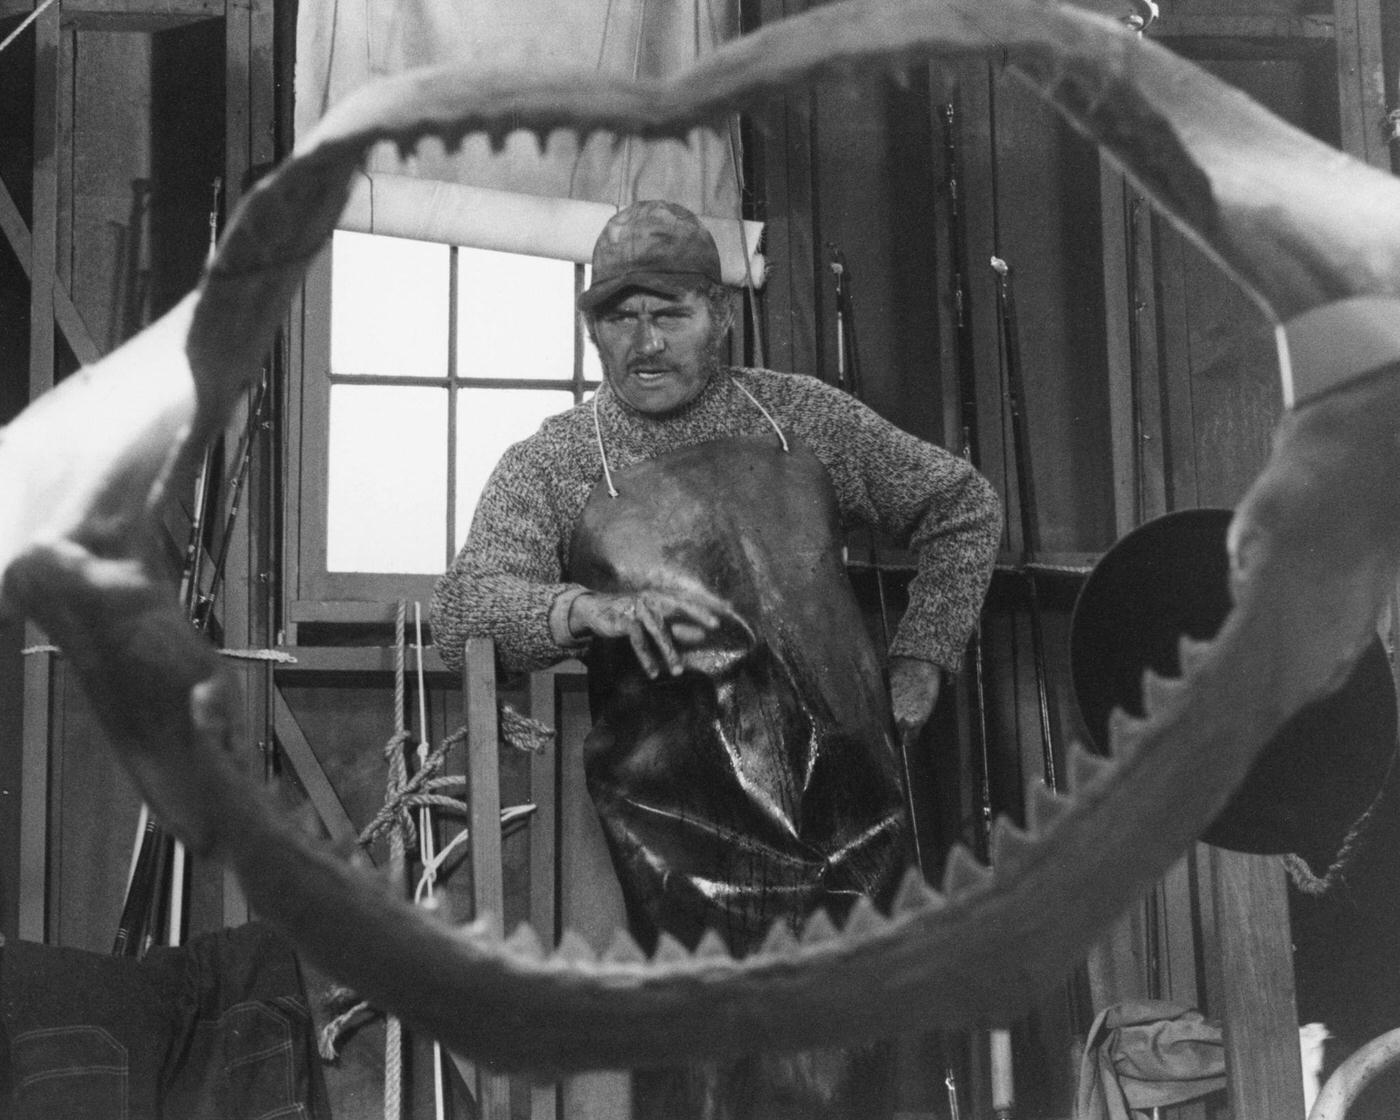 English actor Robert Shaw as Quint, viewed through a set of shark jaws, in a publicity still for 'Jaws', 1975.